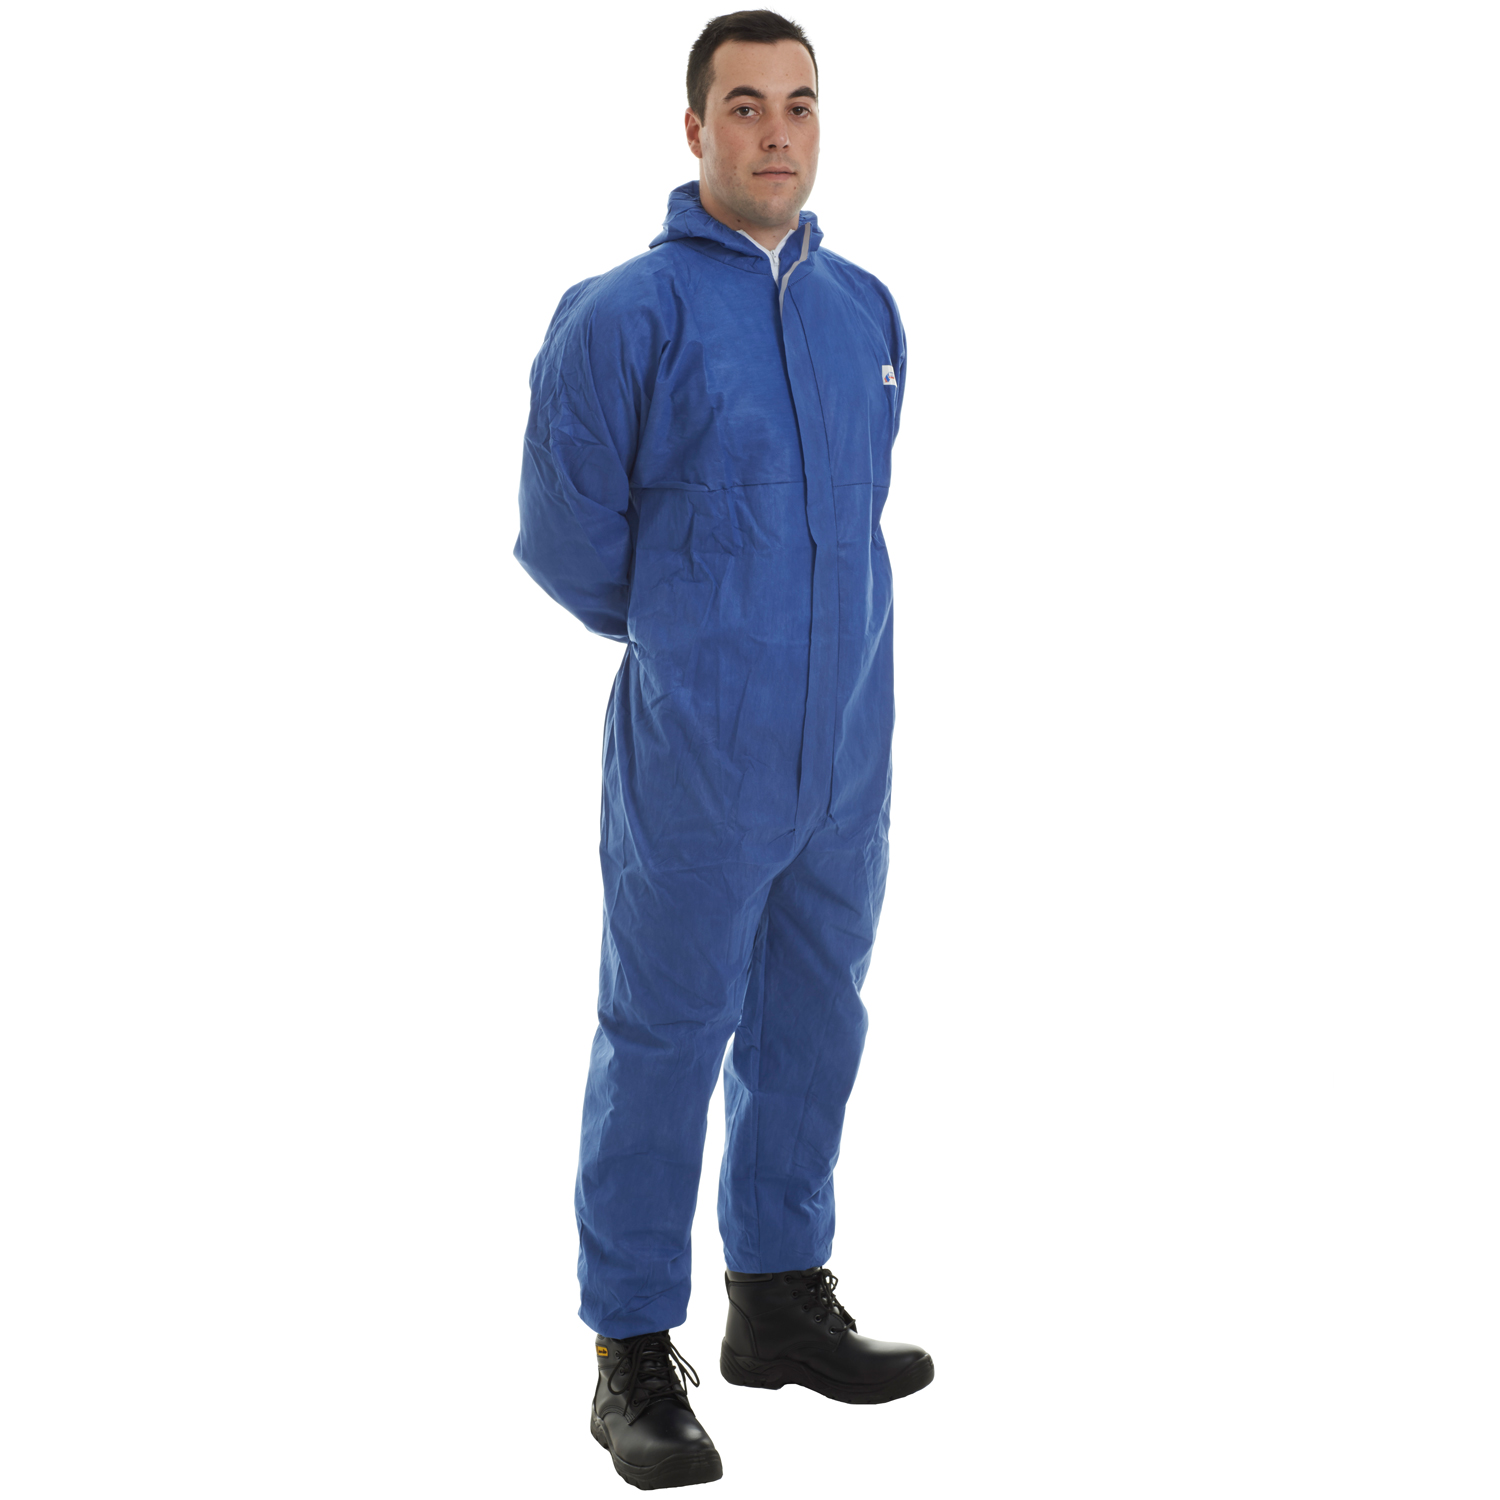 Supertex SMS Disposable Coverall Blue - Small 